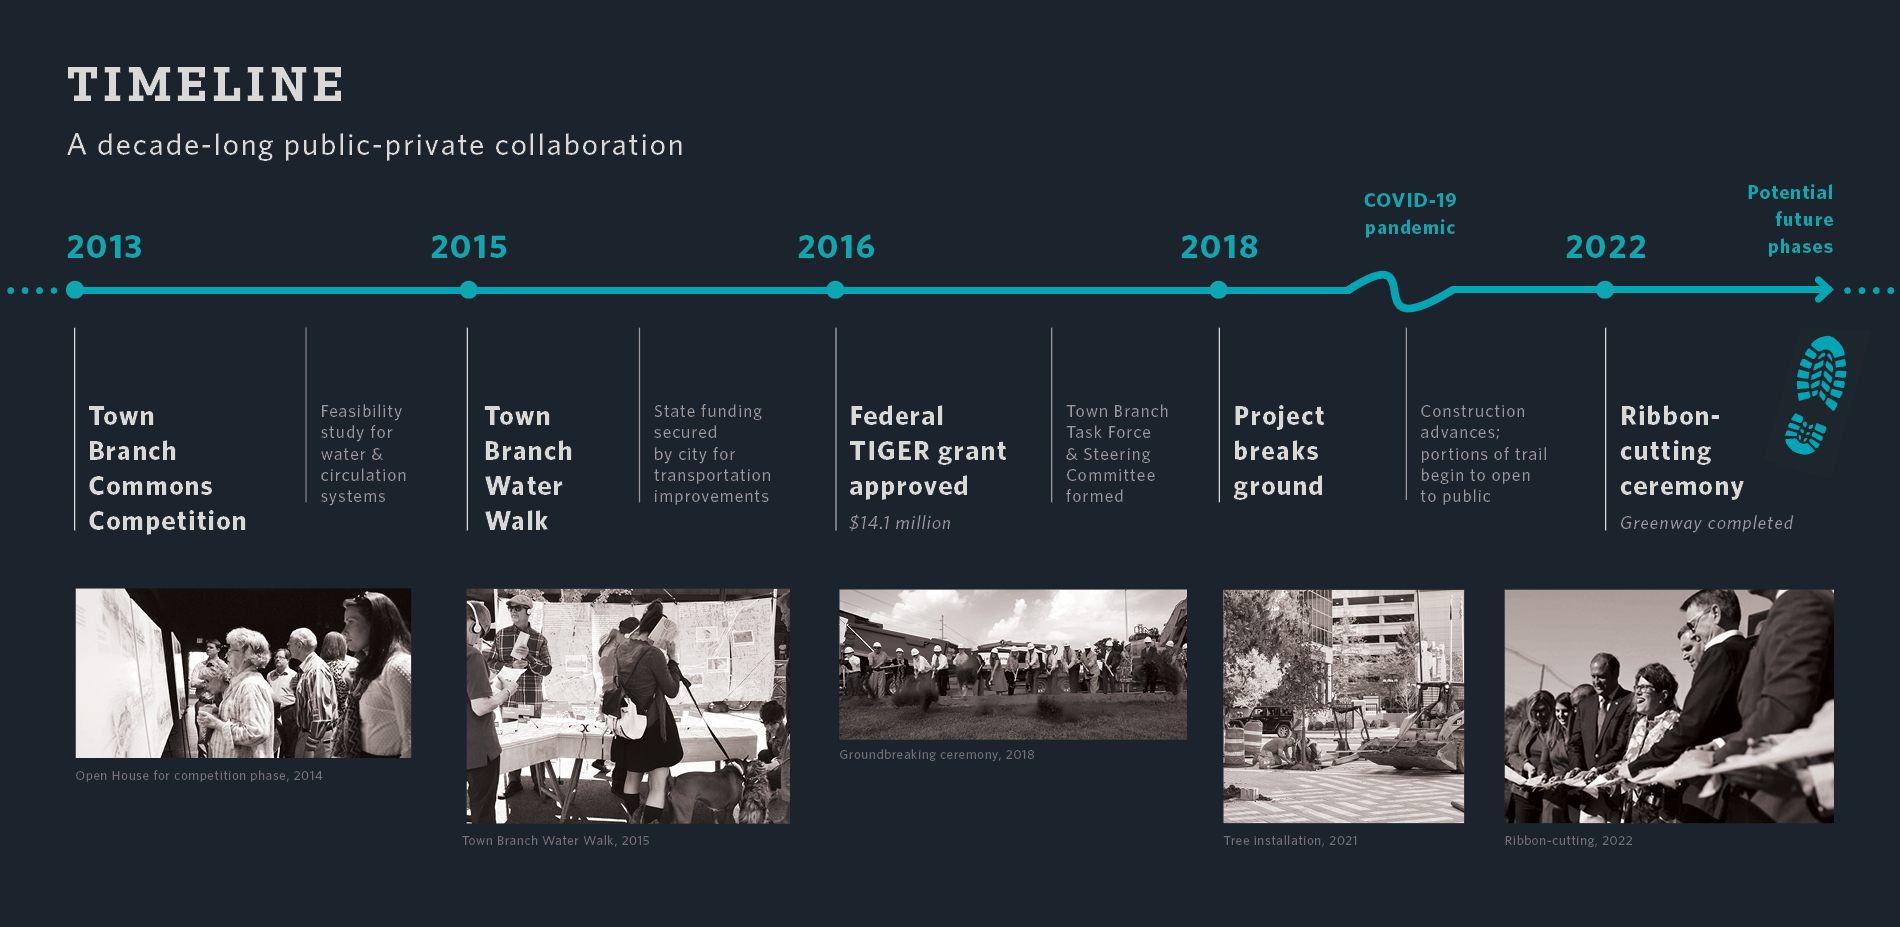 Town Branch Commons Timeline